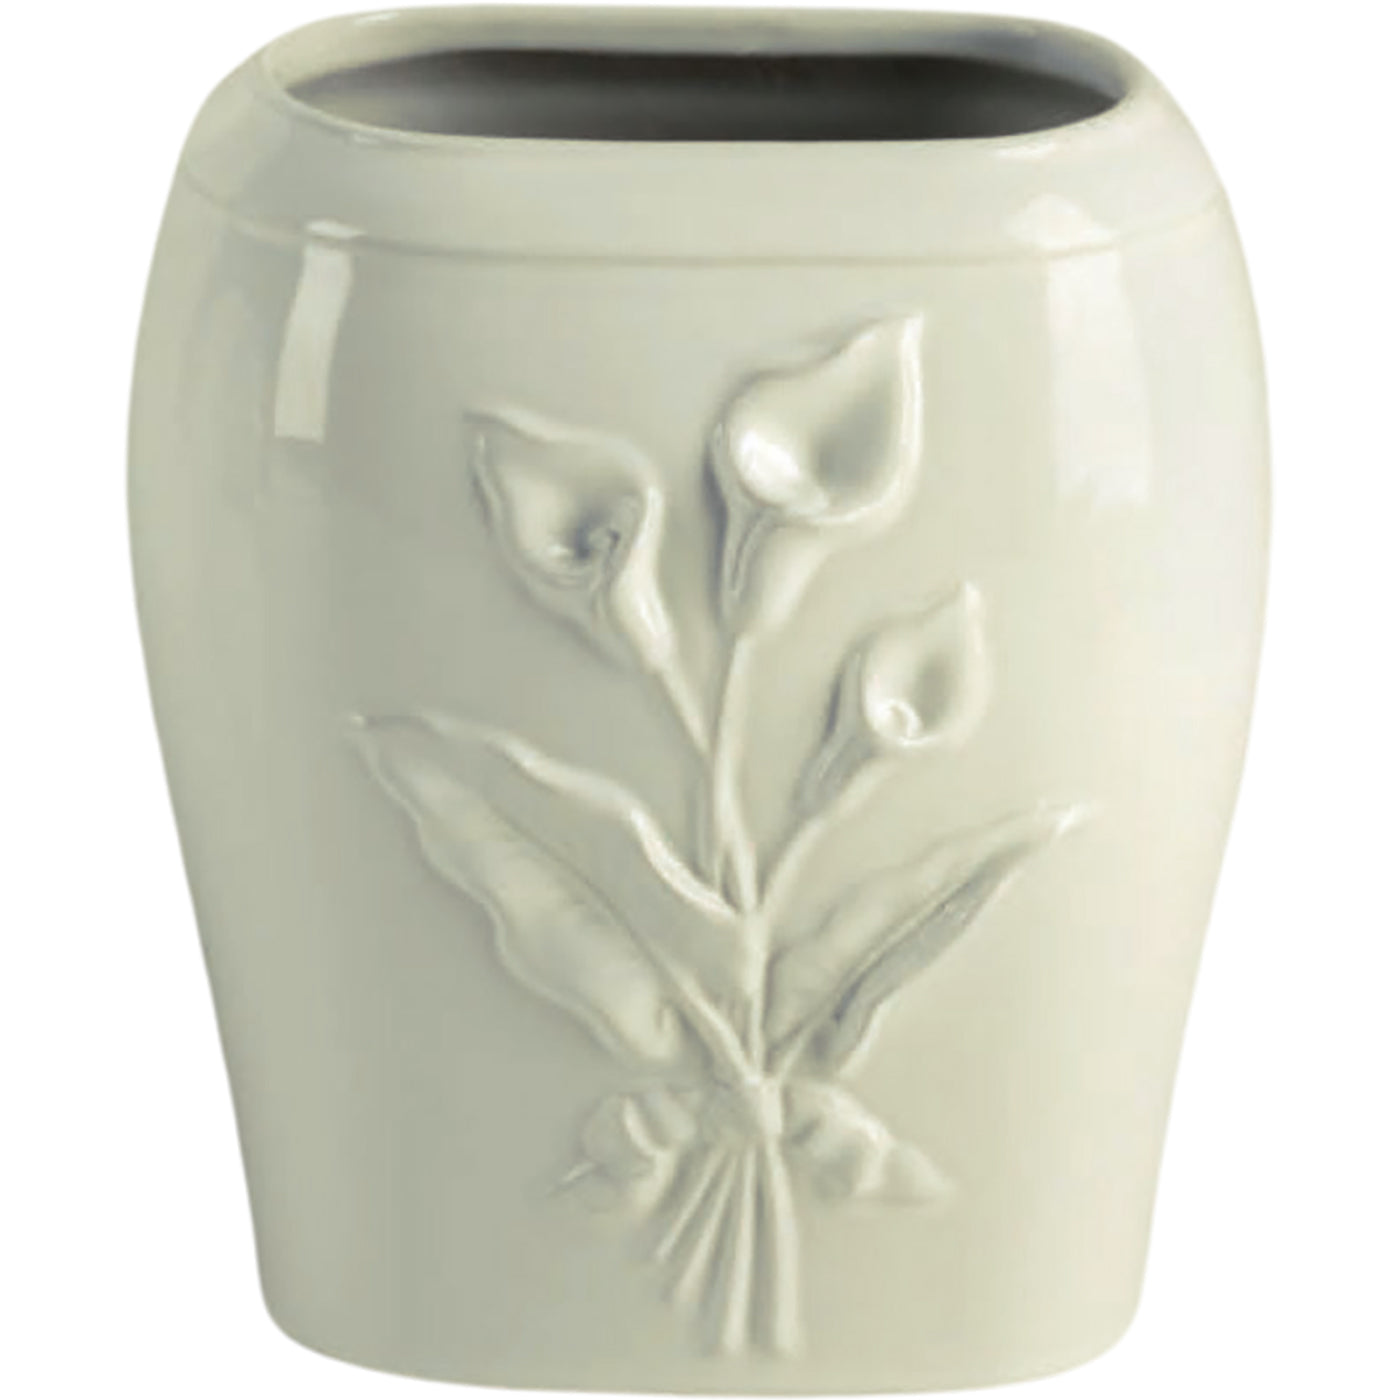 Rectangular grave vase Calla ivory 19x17cm - 7.5x6.7in In ivory porcelain, ground attached CAL160T/A